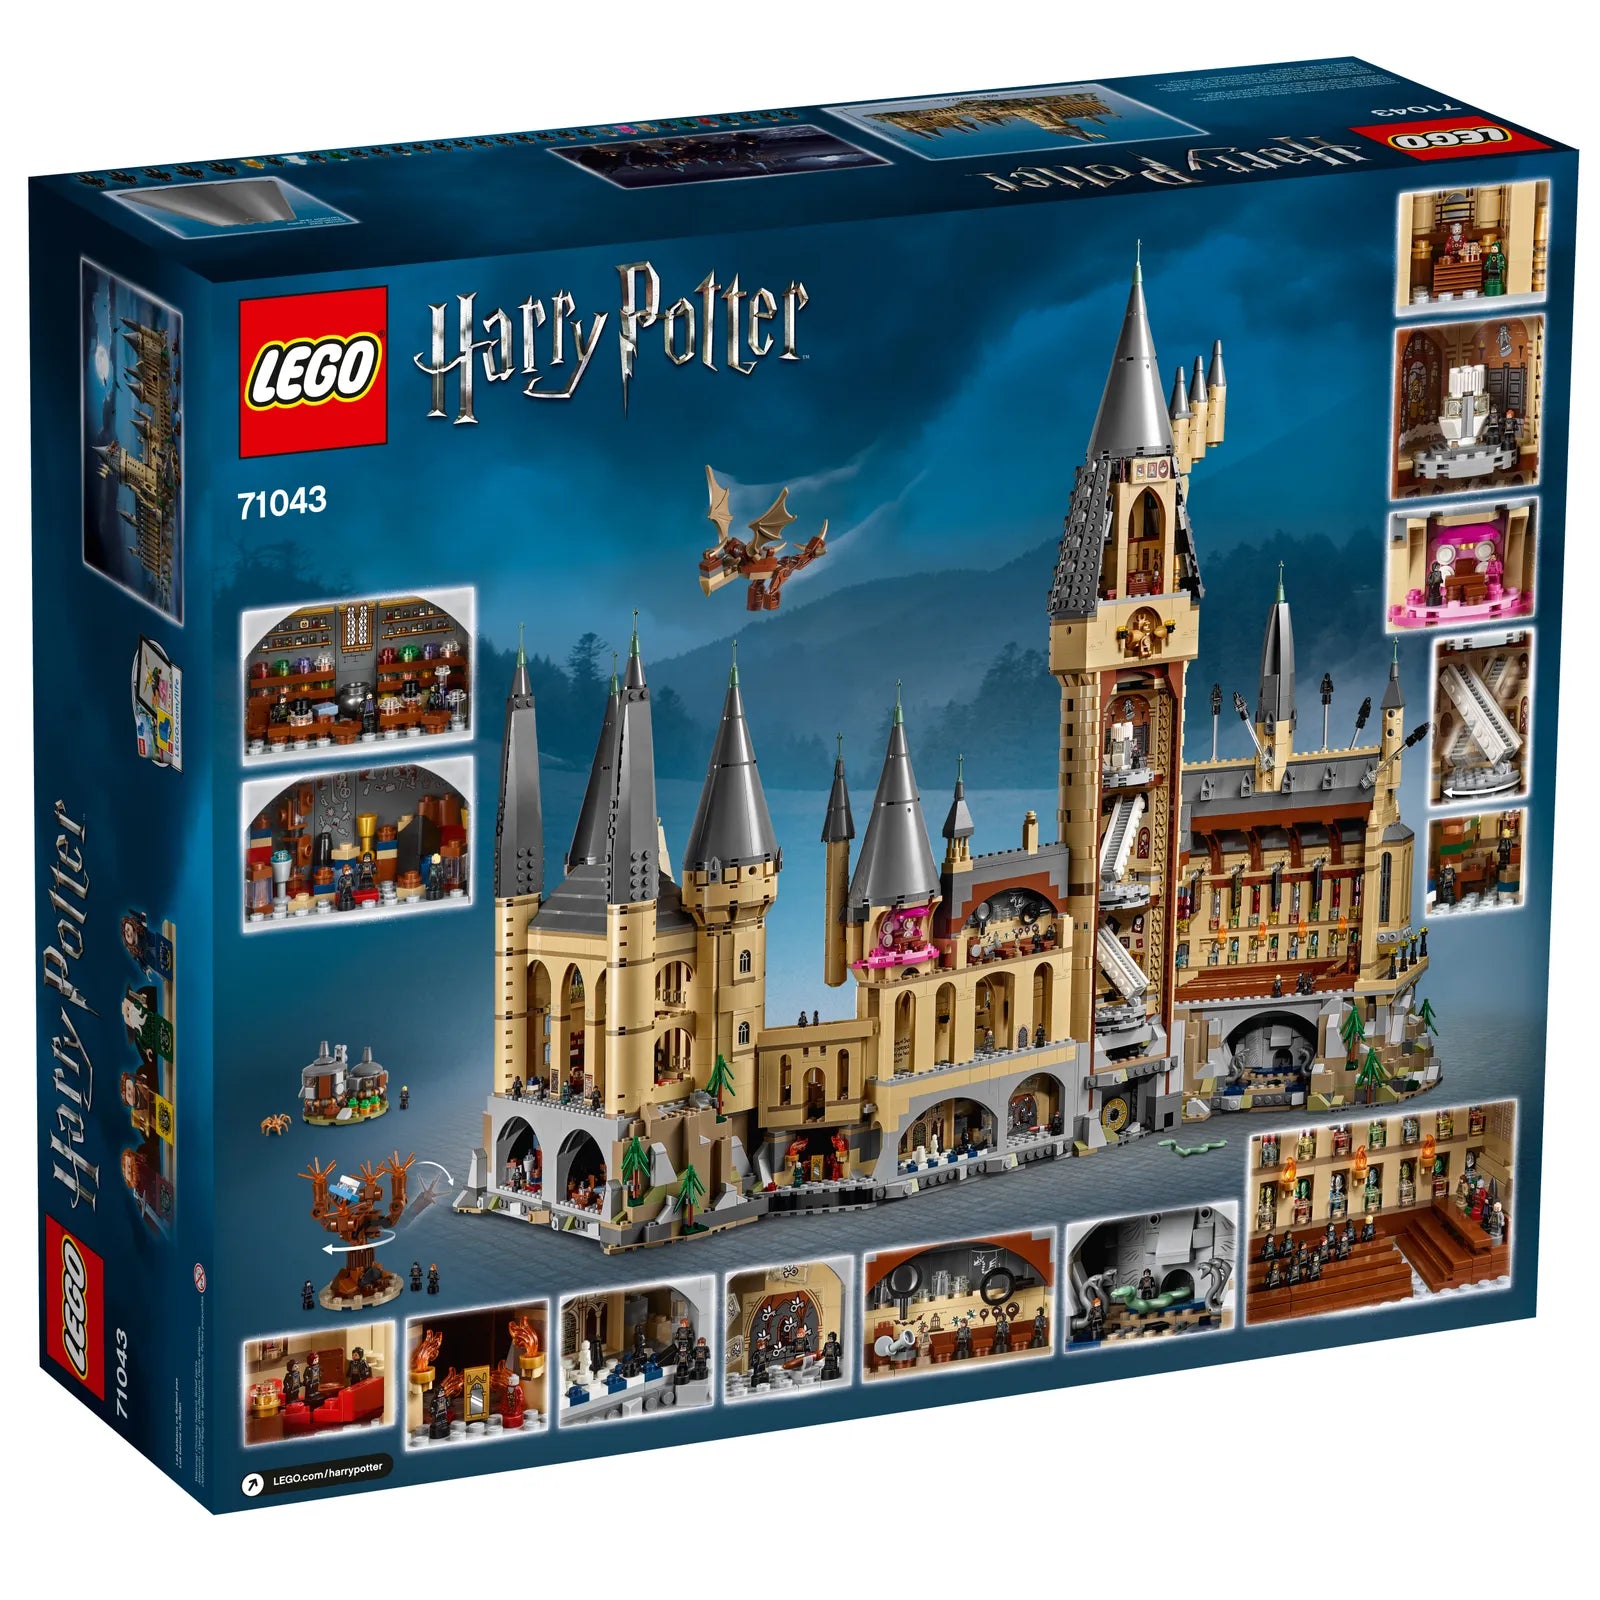 Harry Potter Hogwarts Astronomy Tower 3D Model Puzzle Kit - Otto's